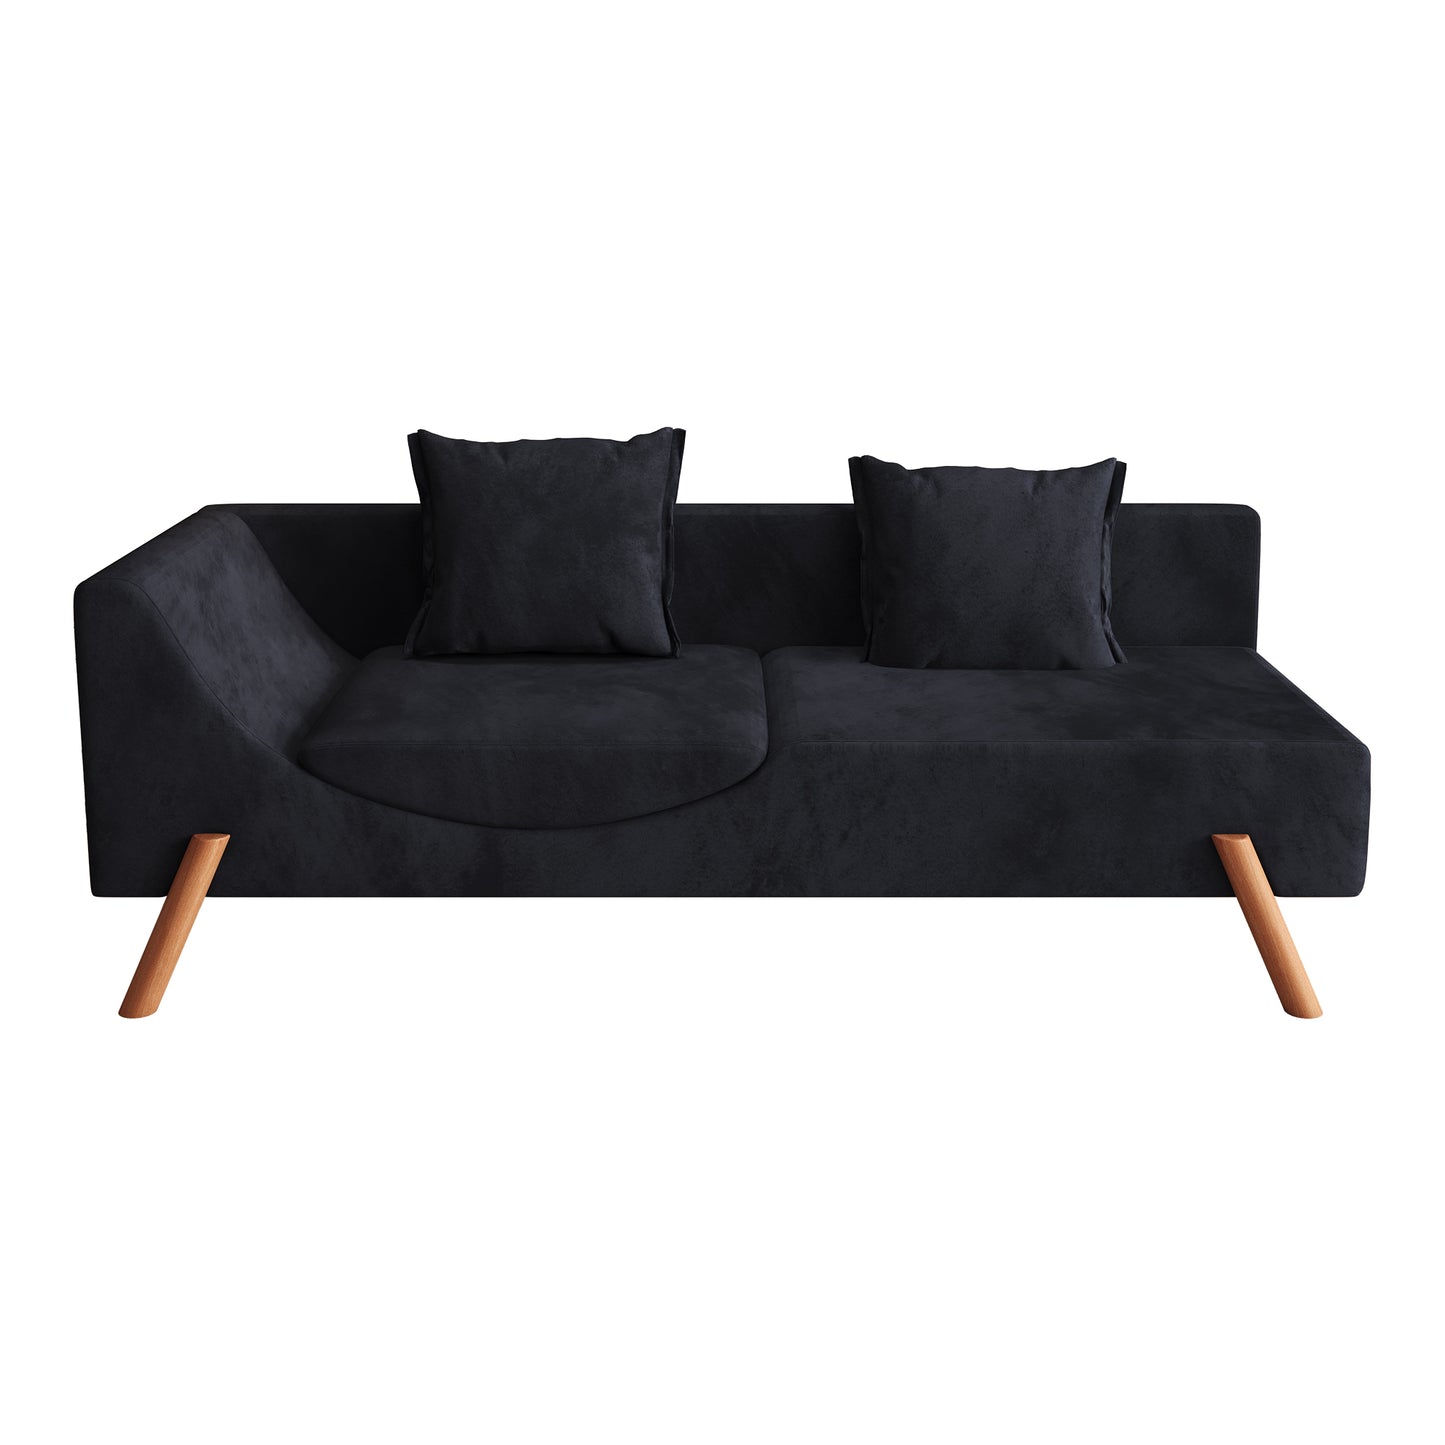 Cut-and-fill Chaise Lounge, Convertible Multifunctional Sofa